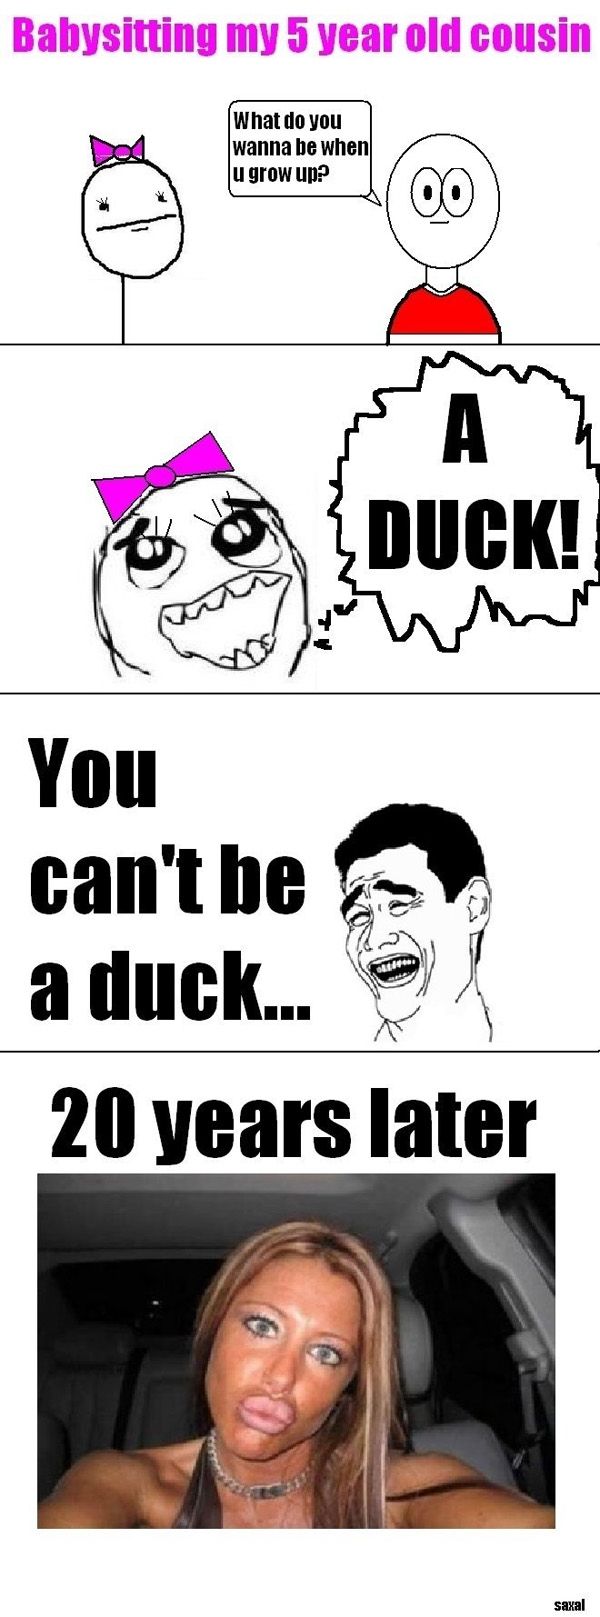 You can't be a duck...